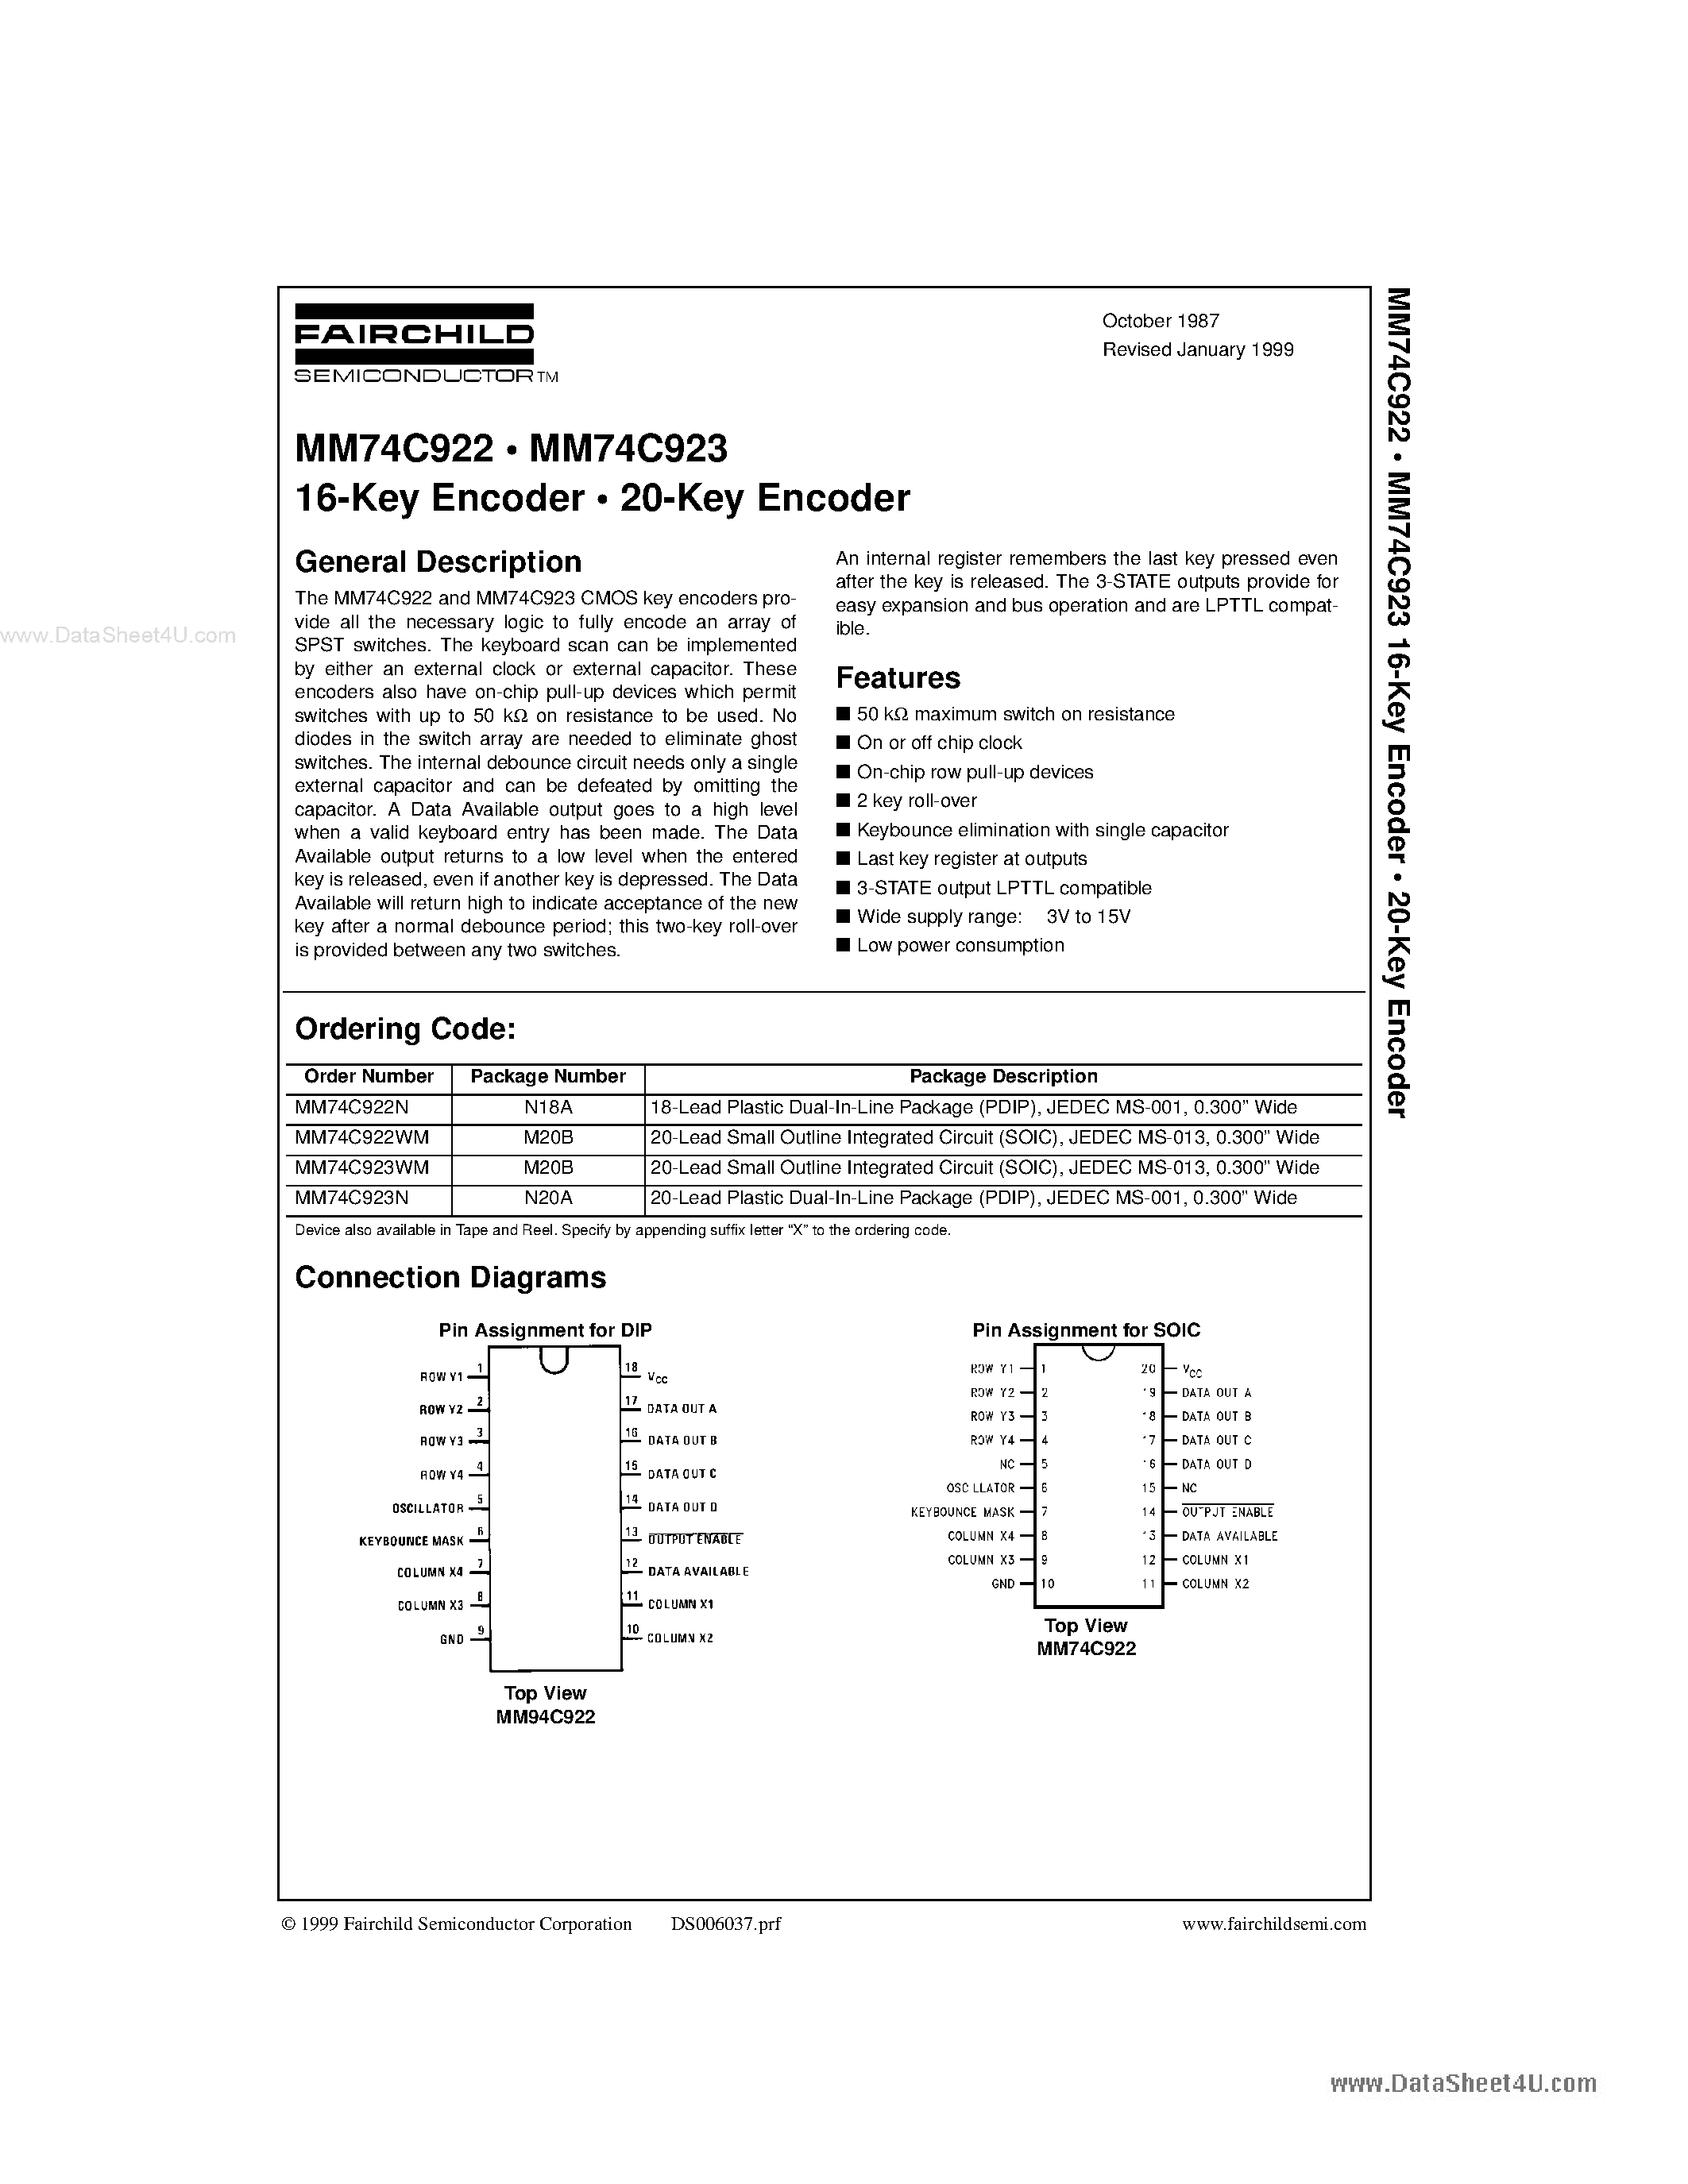 Datasheet M74C923 - Search -----> MM74C923 page 1